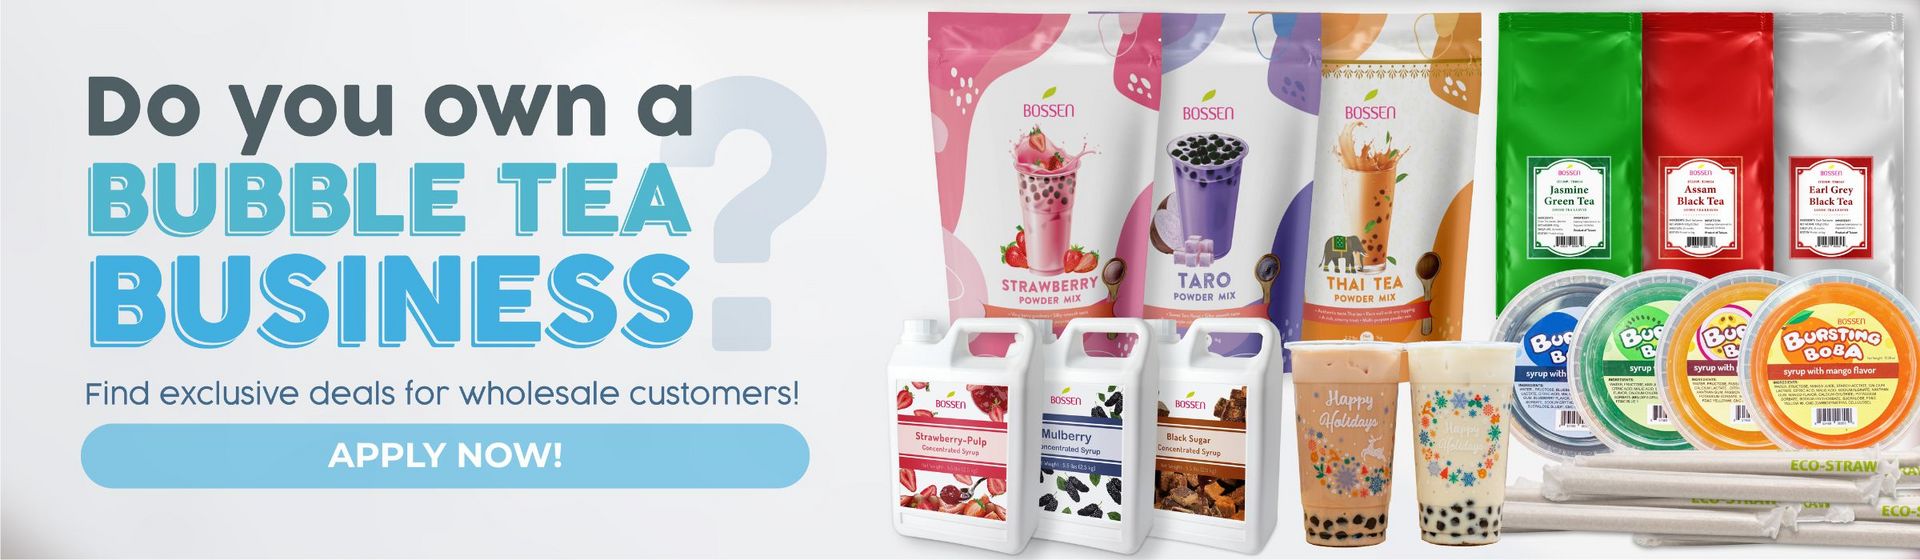 Do you own a Bubble Tea Business? Find exclusive deals for wholesale customers! Apply now!